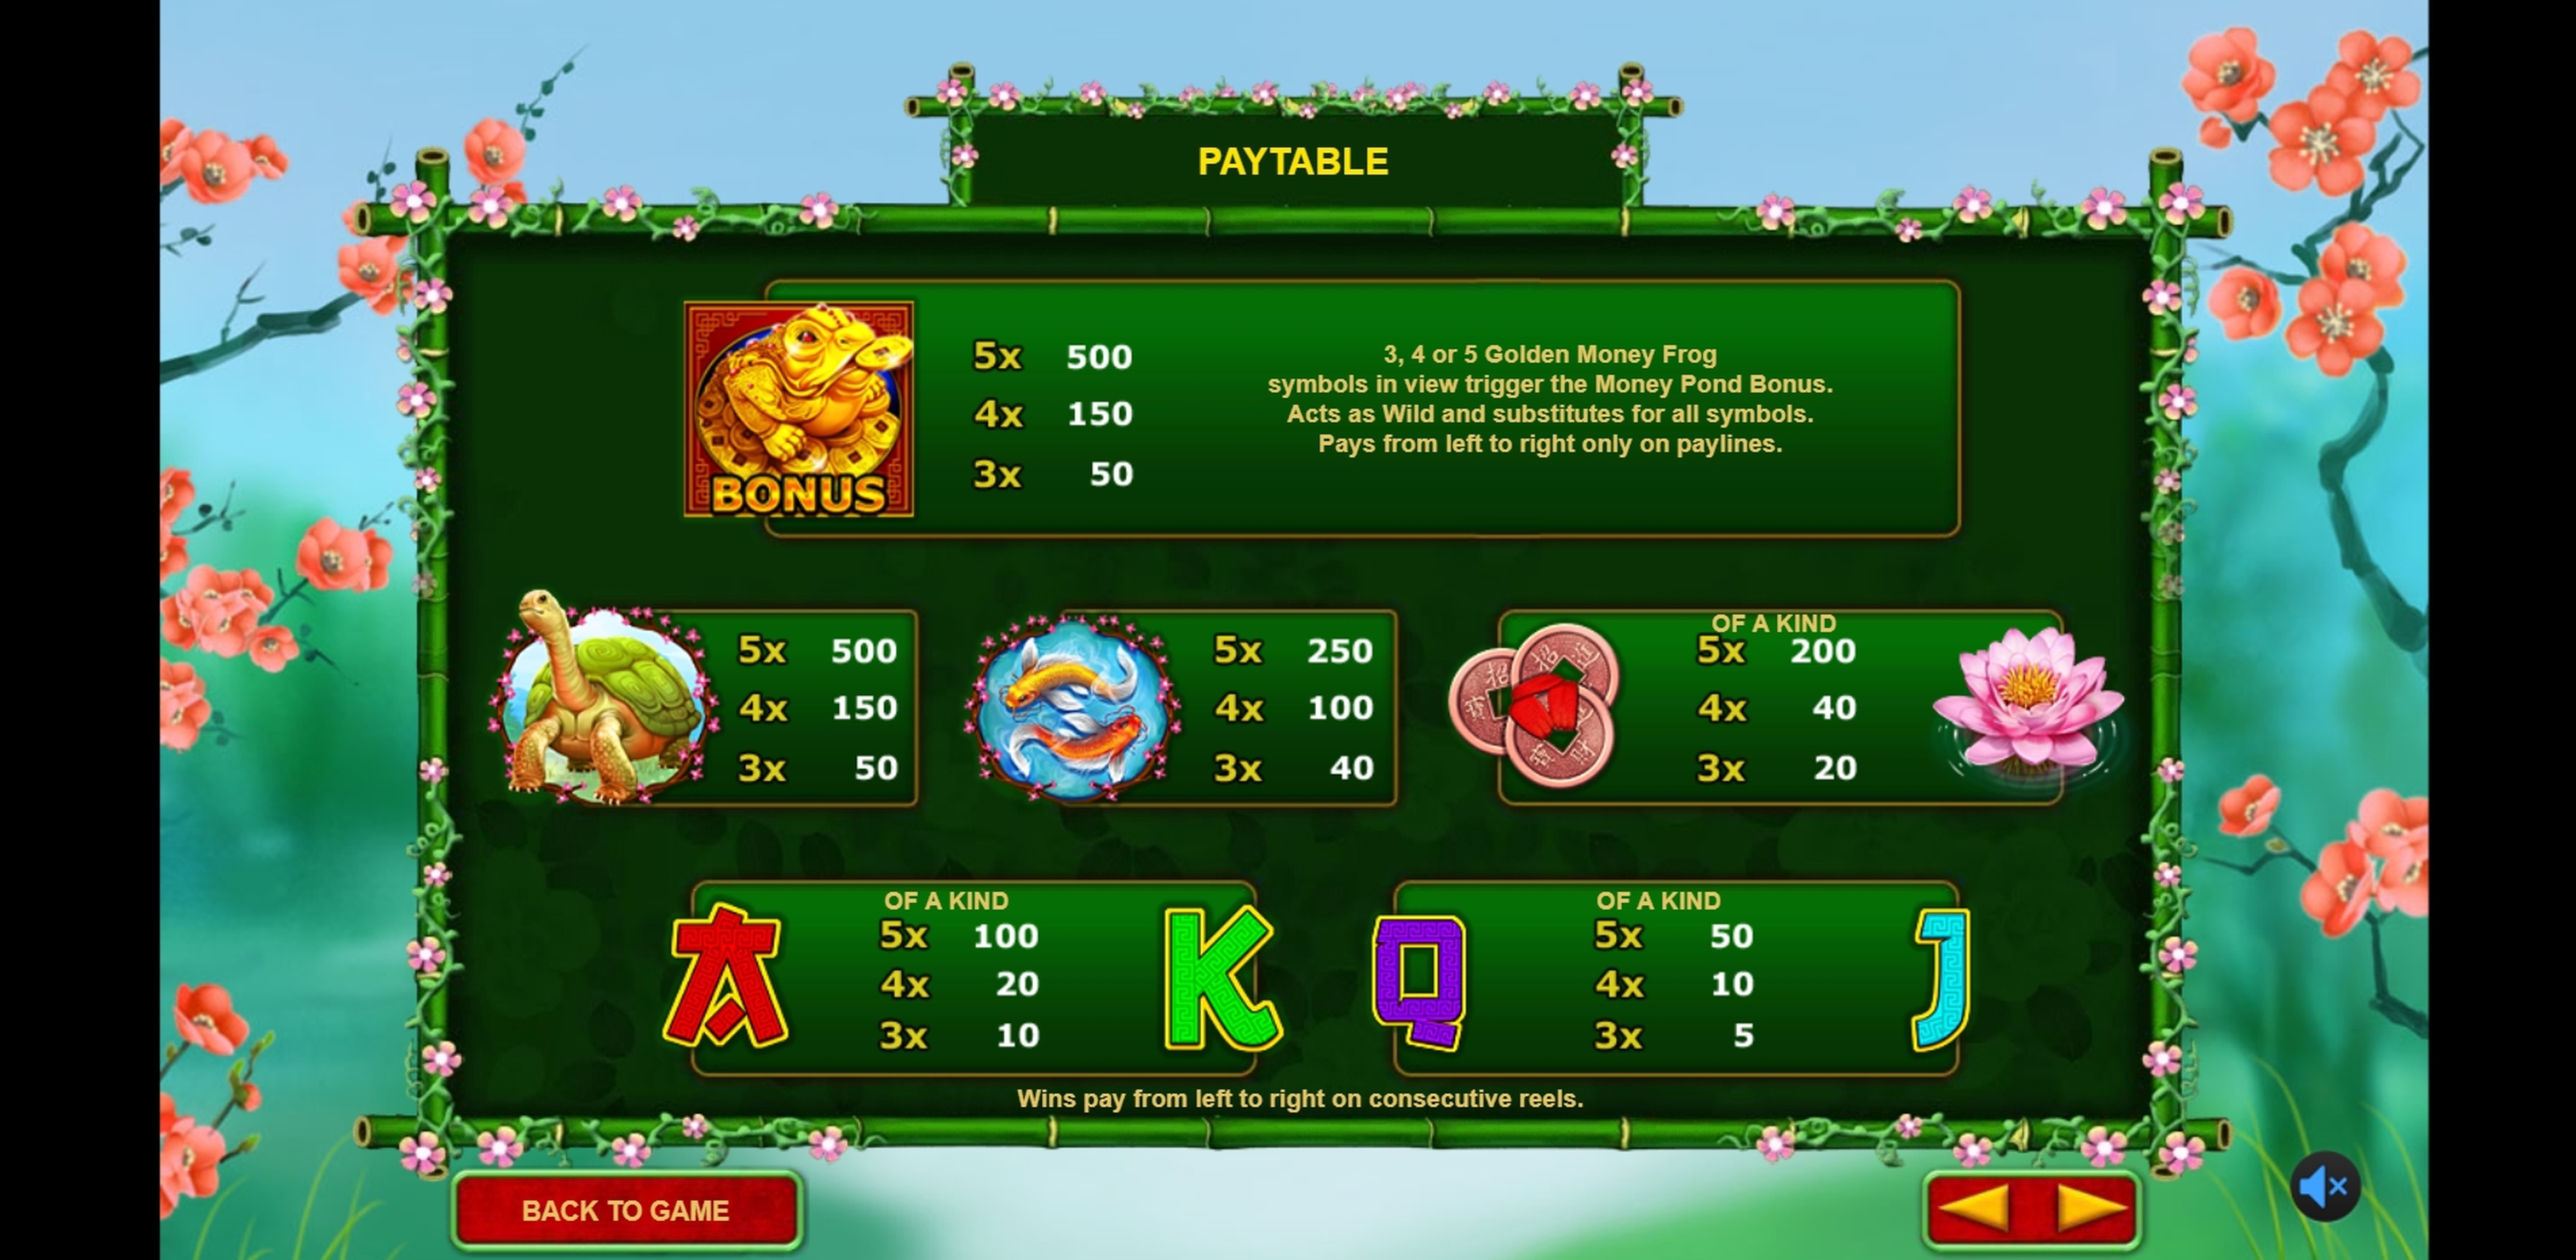 Info of Golden Money Frog Slot Game by Sigma Gaming